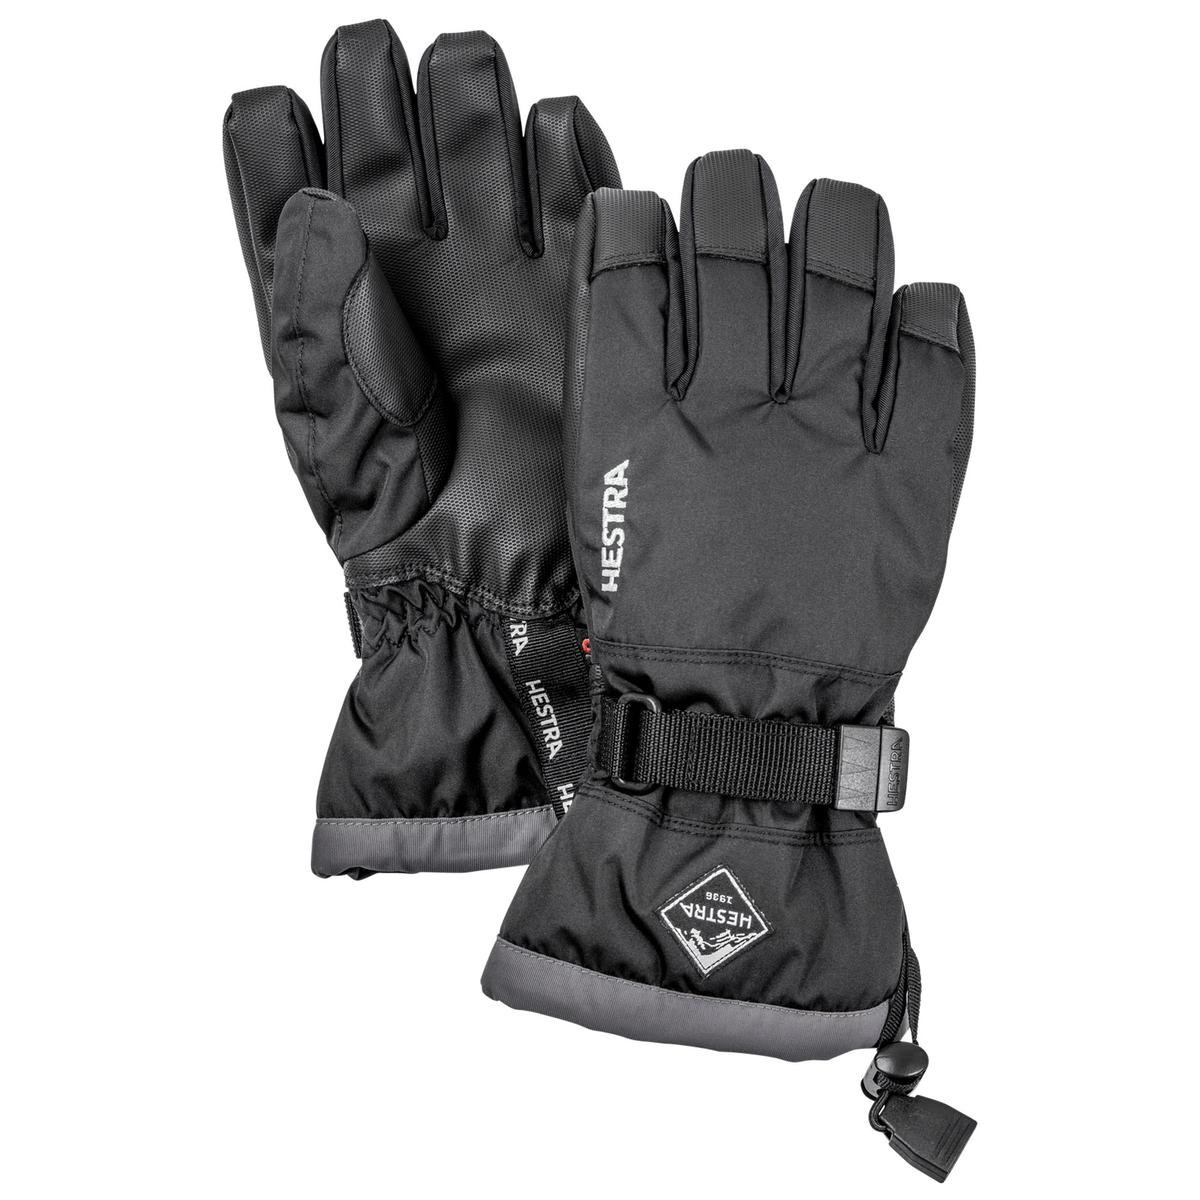 Hestra Gauntlet CZone Junior Glove I Waterproof Insulated Kids Glove for Skiing Snowboarding and Playing in The Snow 